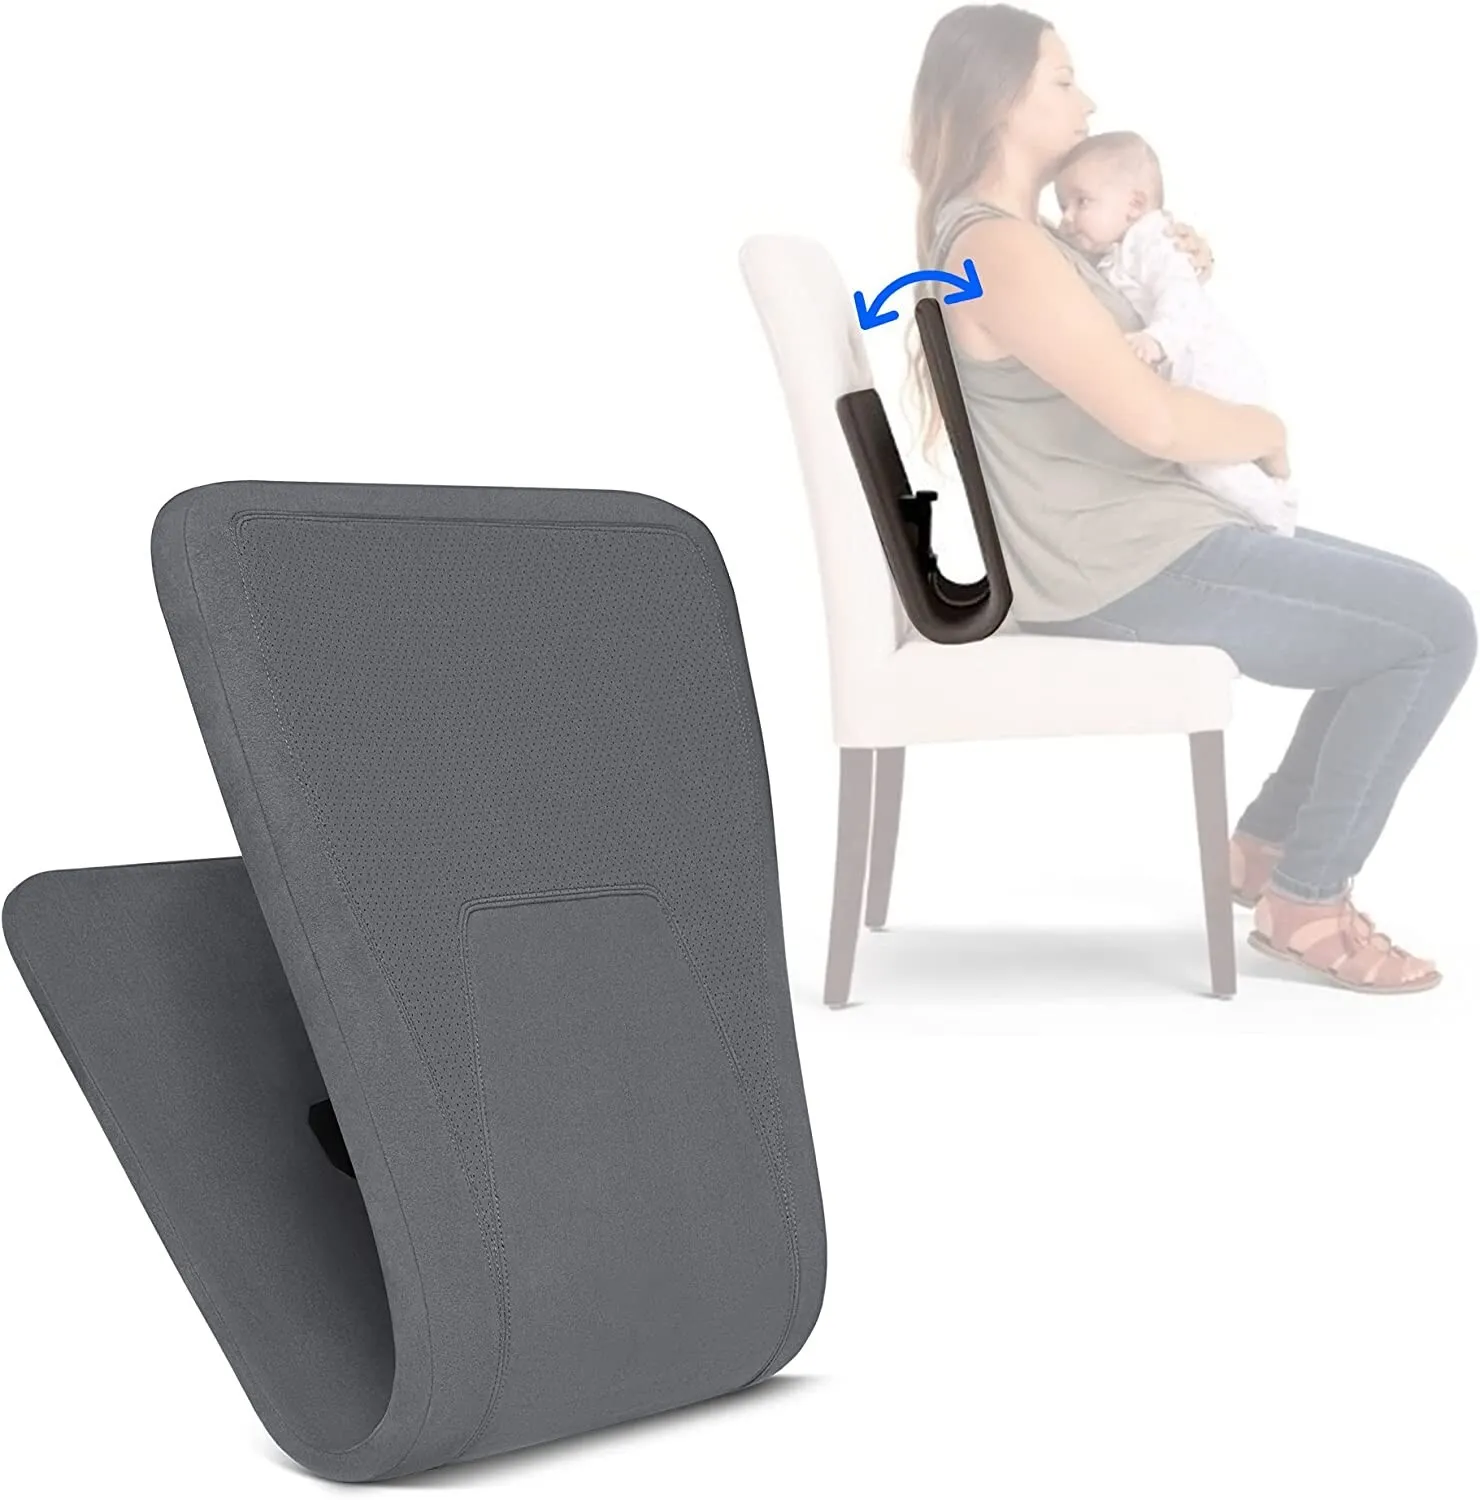 Ready Rocker Portable Rocking-chair - Ideal For Nursery Furniture, Home-office